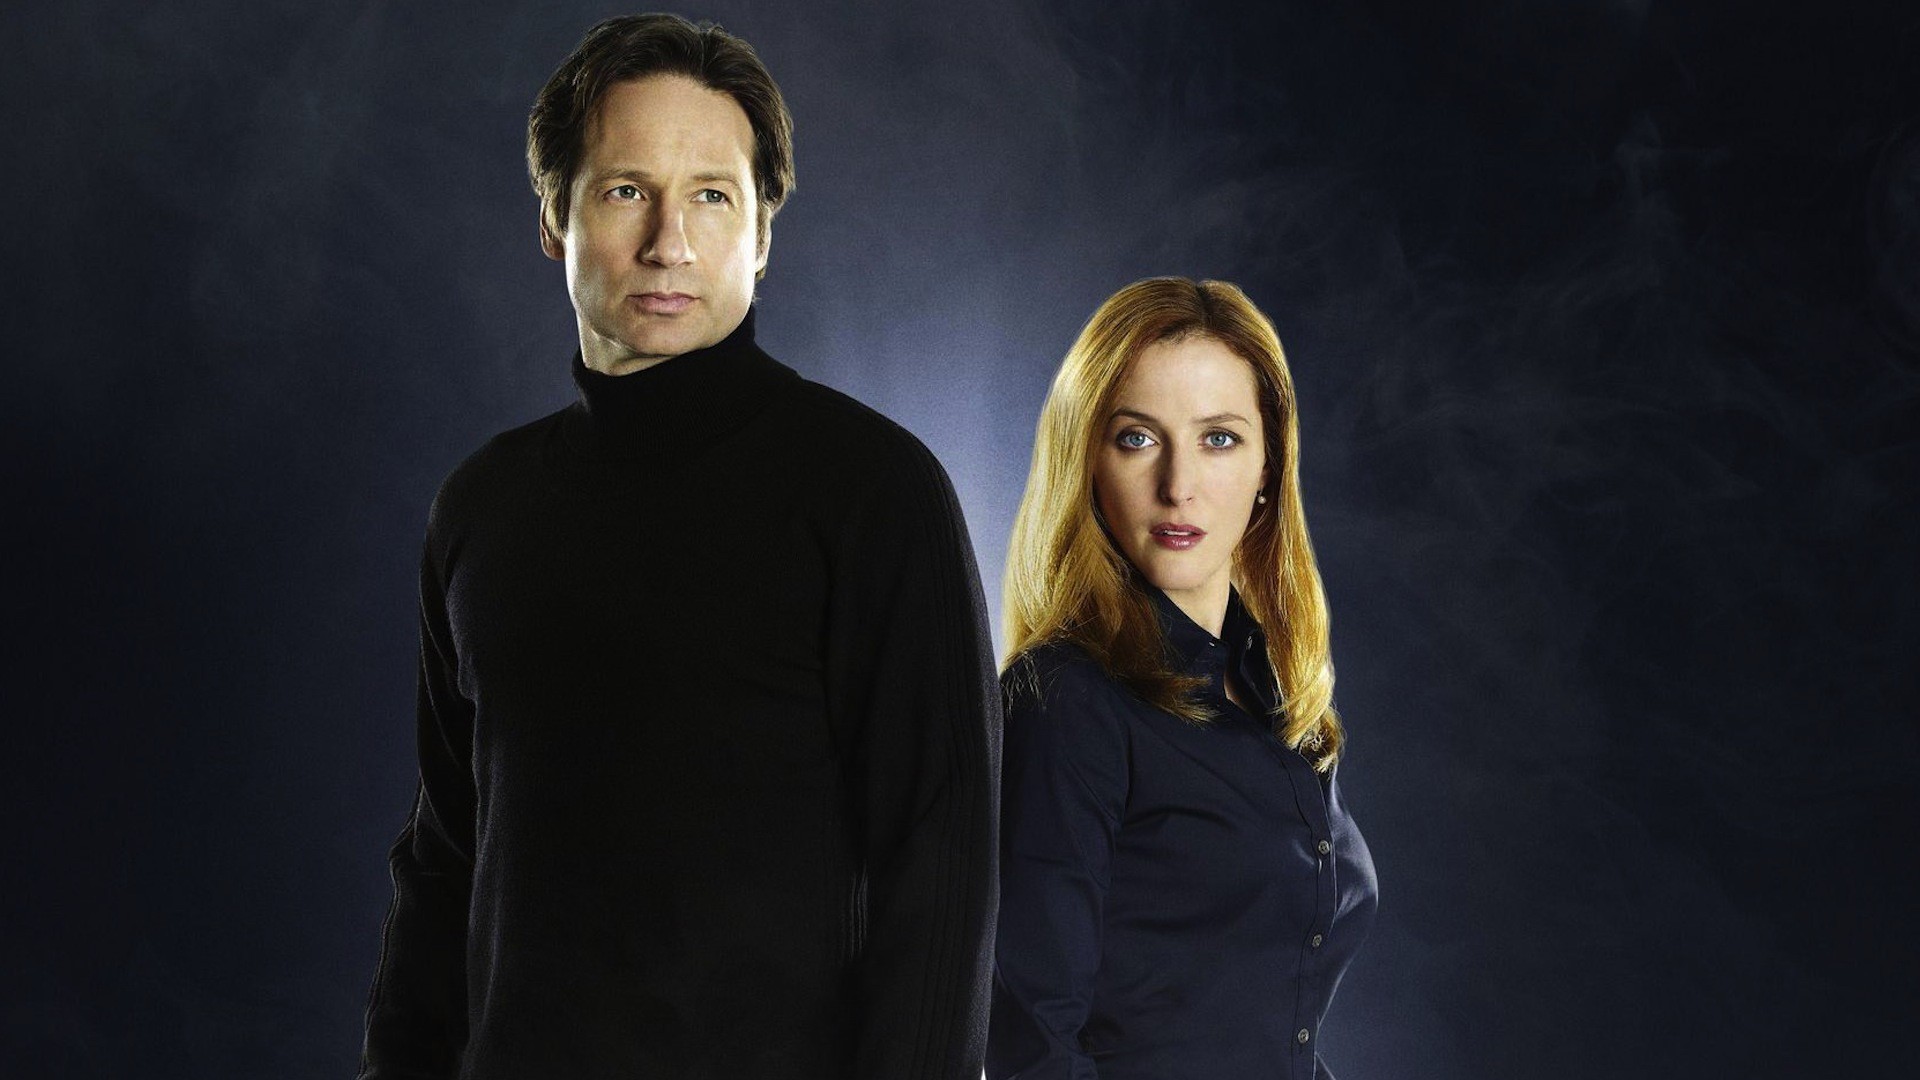 1920x1080 The X-Files images